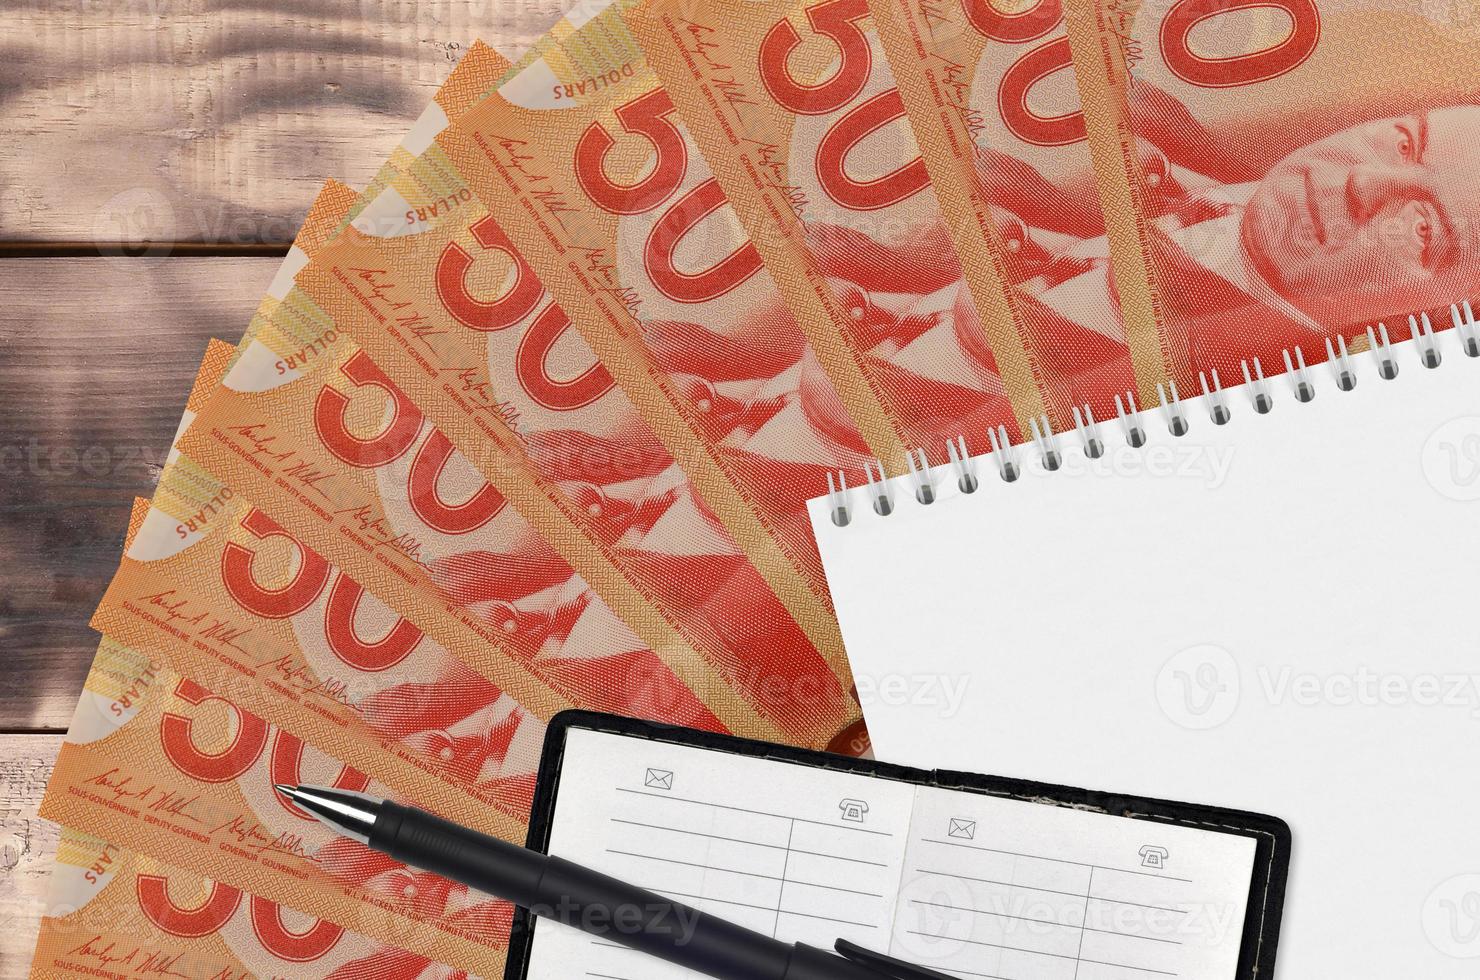 50 Canadian dollars bills fan and notepad with contact book and black pen. Concept of financial planning and business strategy photo